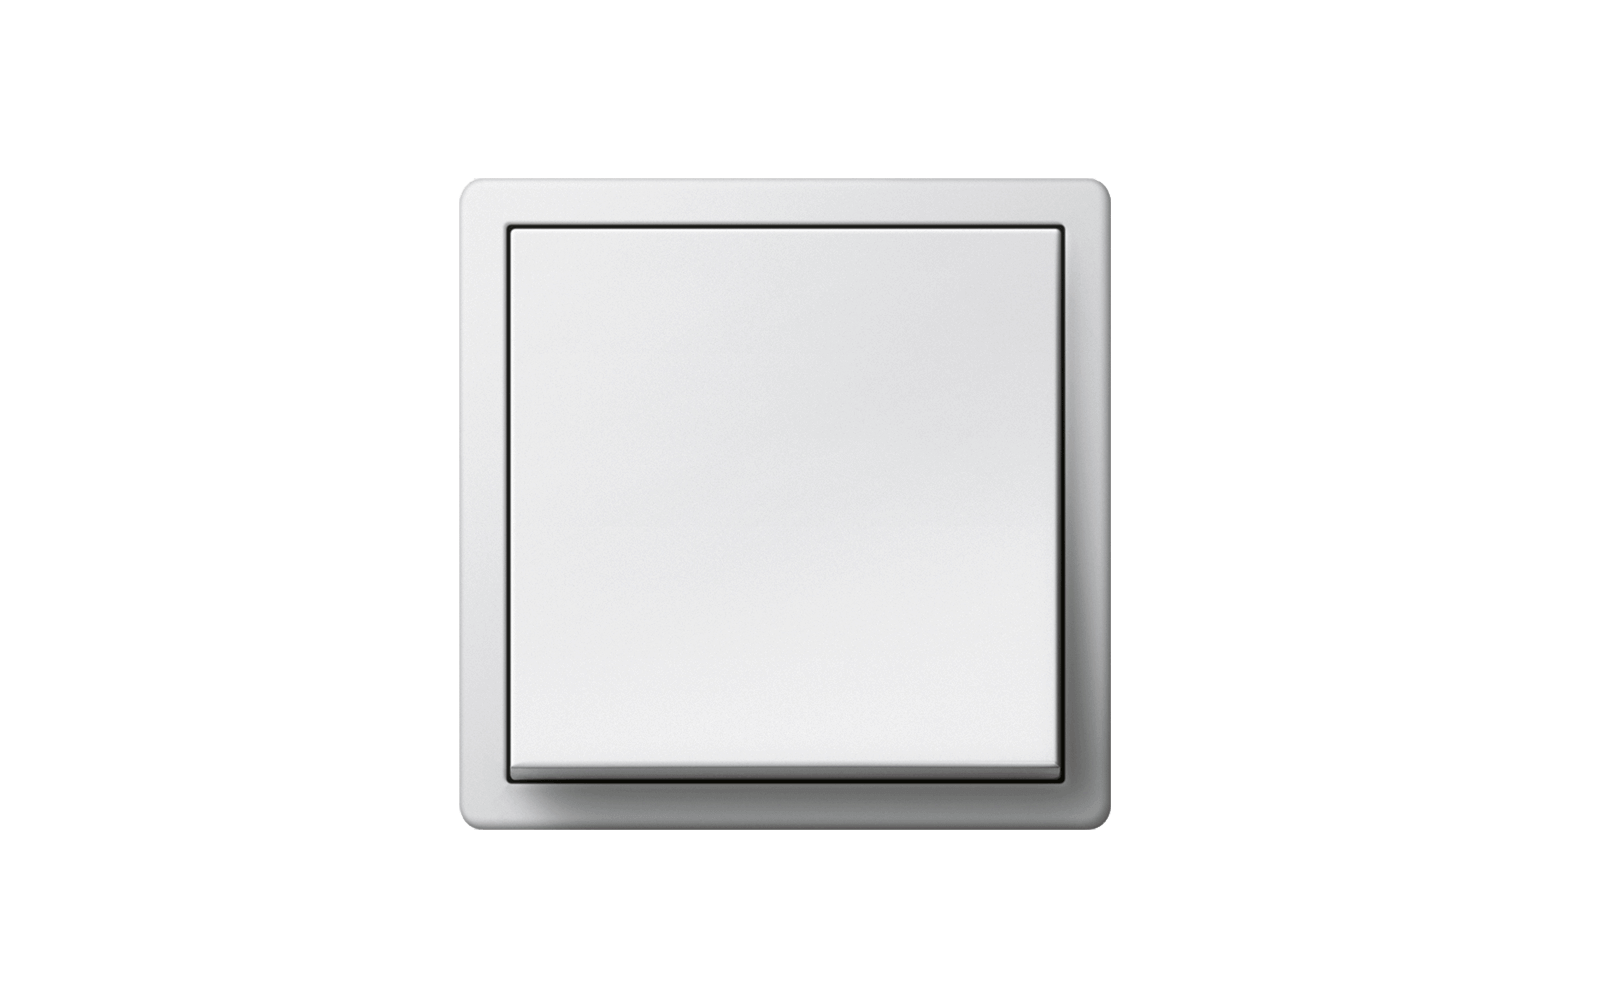 A design classic since 1966: Gira F100 switches in pure white glossy, compatible with the Gira IP flush-mounted radio and other Smart Home solutions.